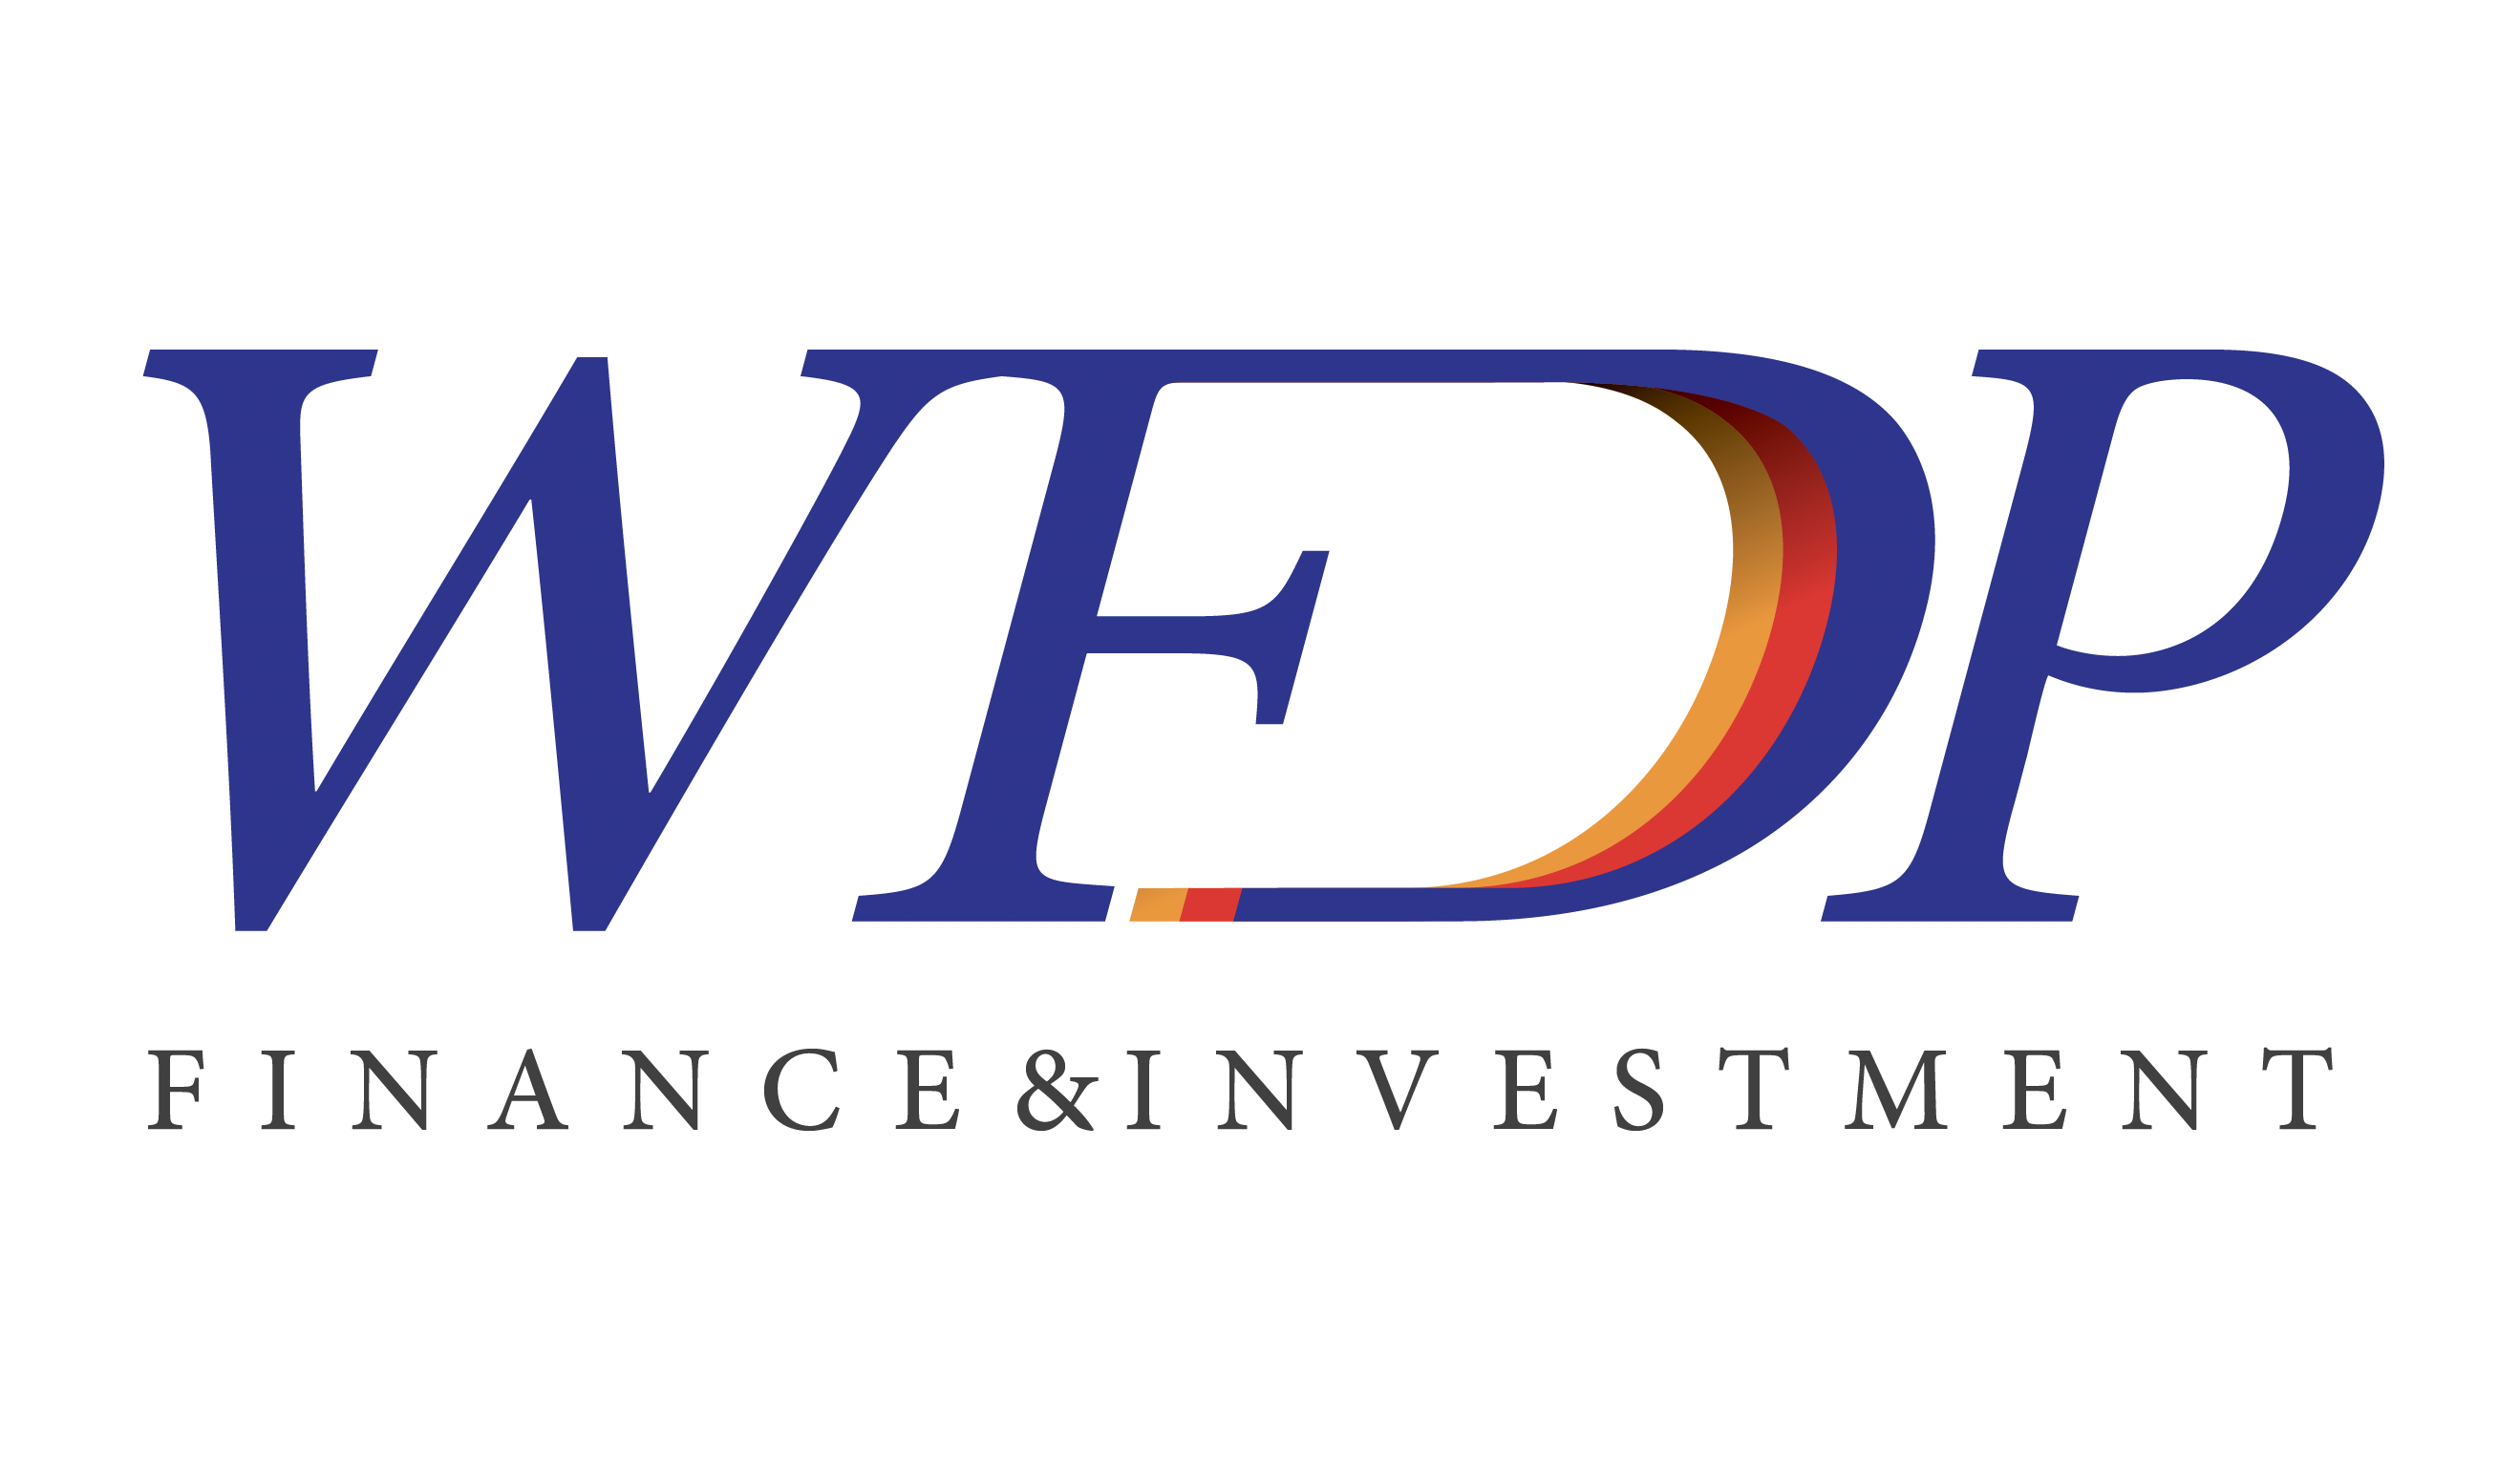 WFDP for Finance and Investment LLC